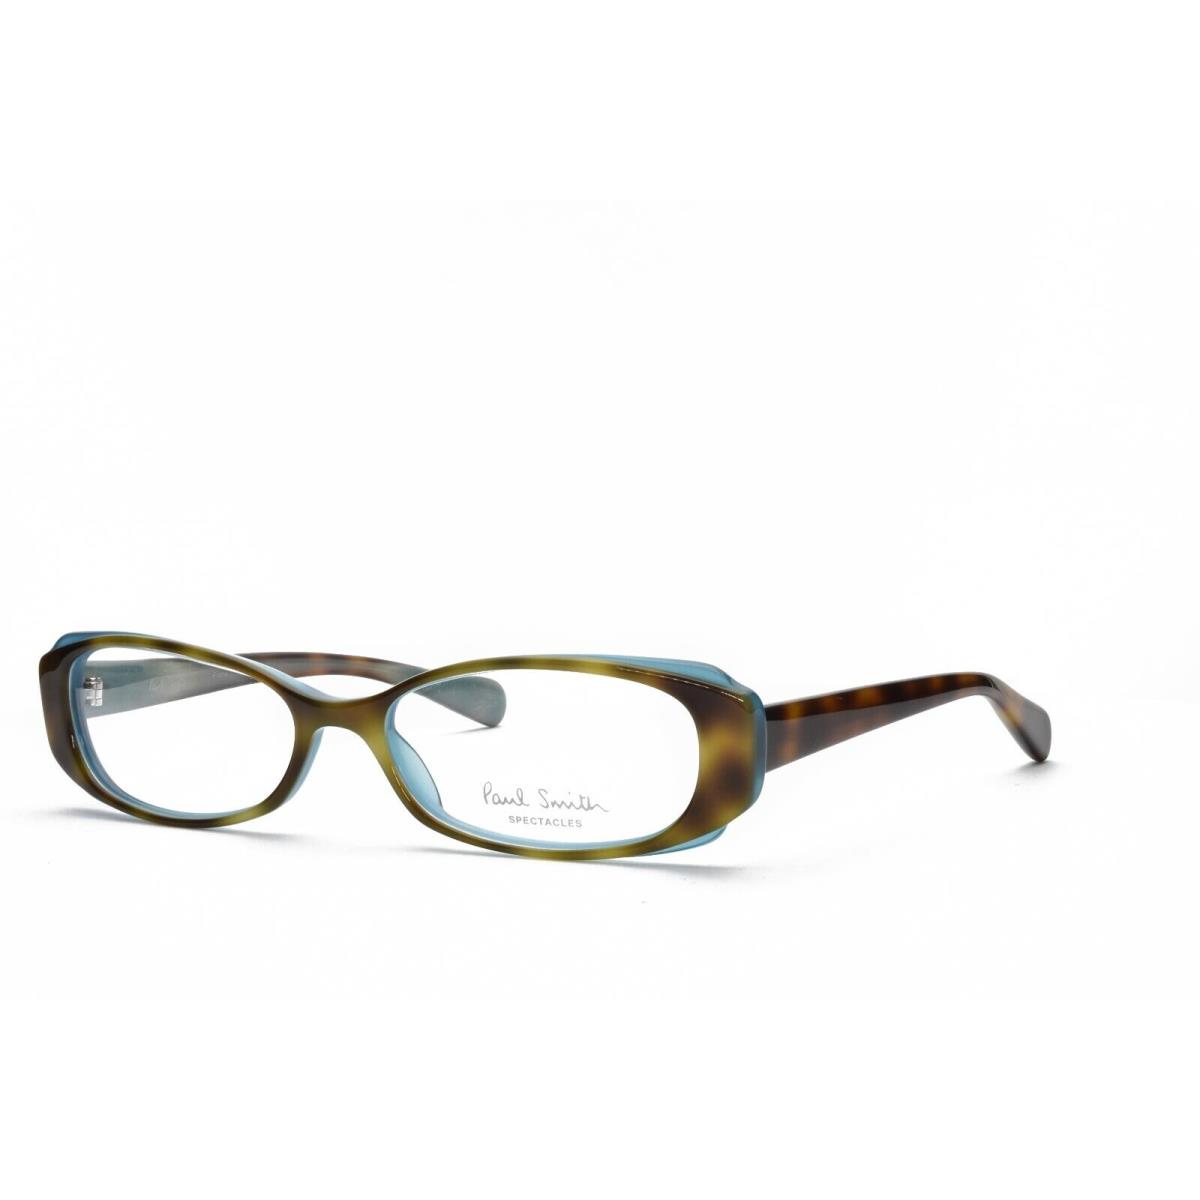 Paul Smith PS 405 Dmaq Eyeglasses Frames Only 51-16-138